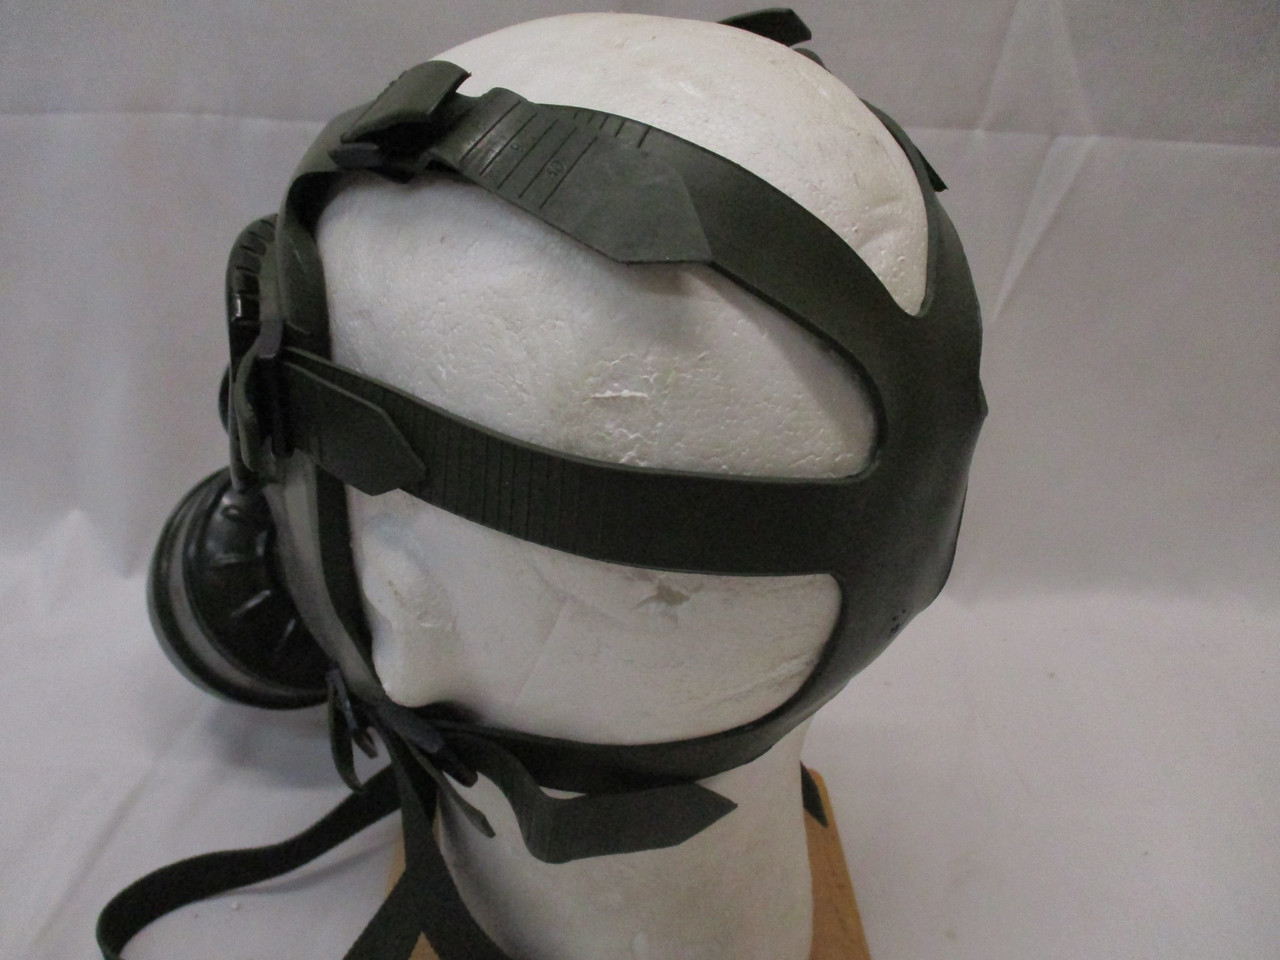 HUNGARIAN MILITARY GAS MASK 40mm NATO FILTER ARMY SURPLUS M74 ROMANIAN w. BAG